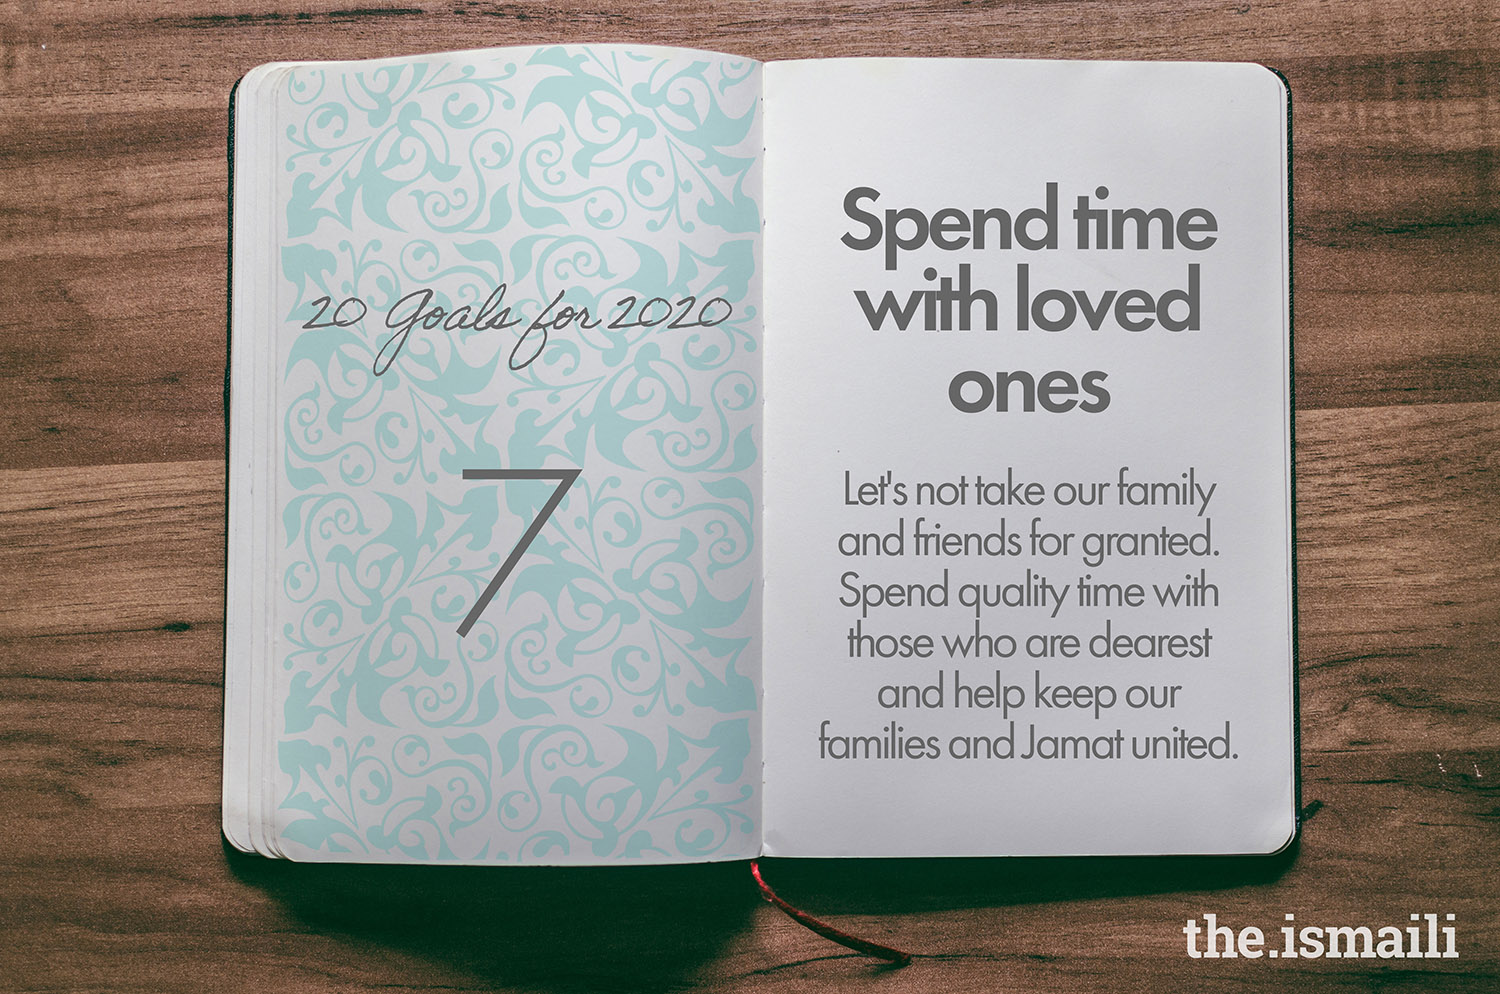 Goal 7: Spend time with loved ones